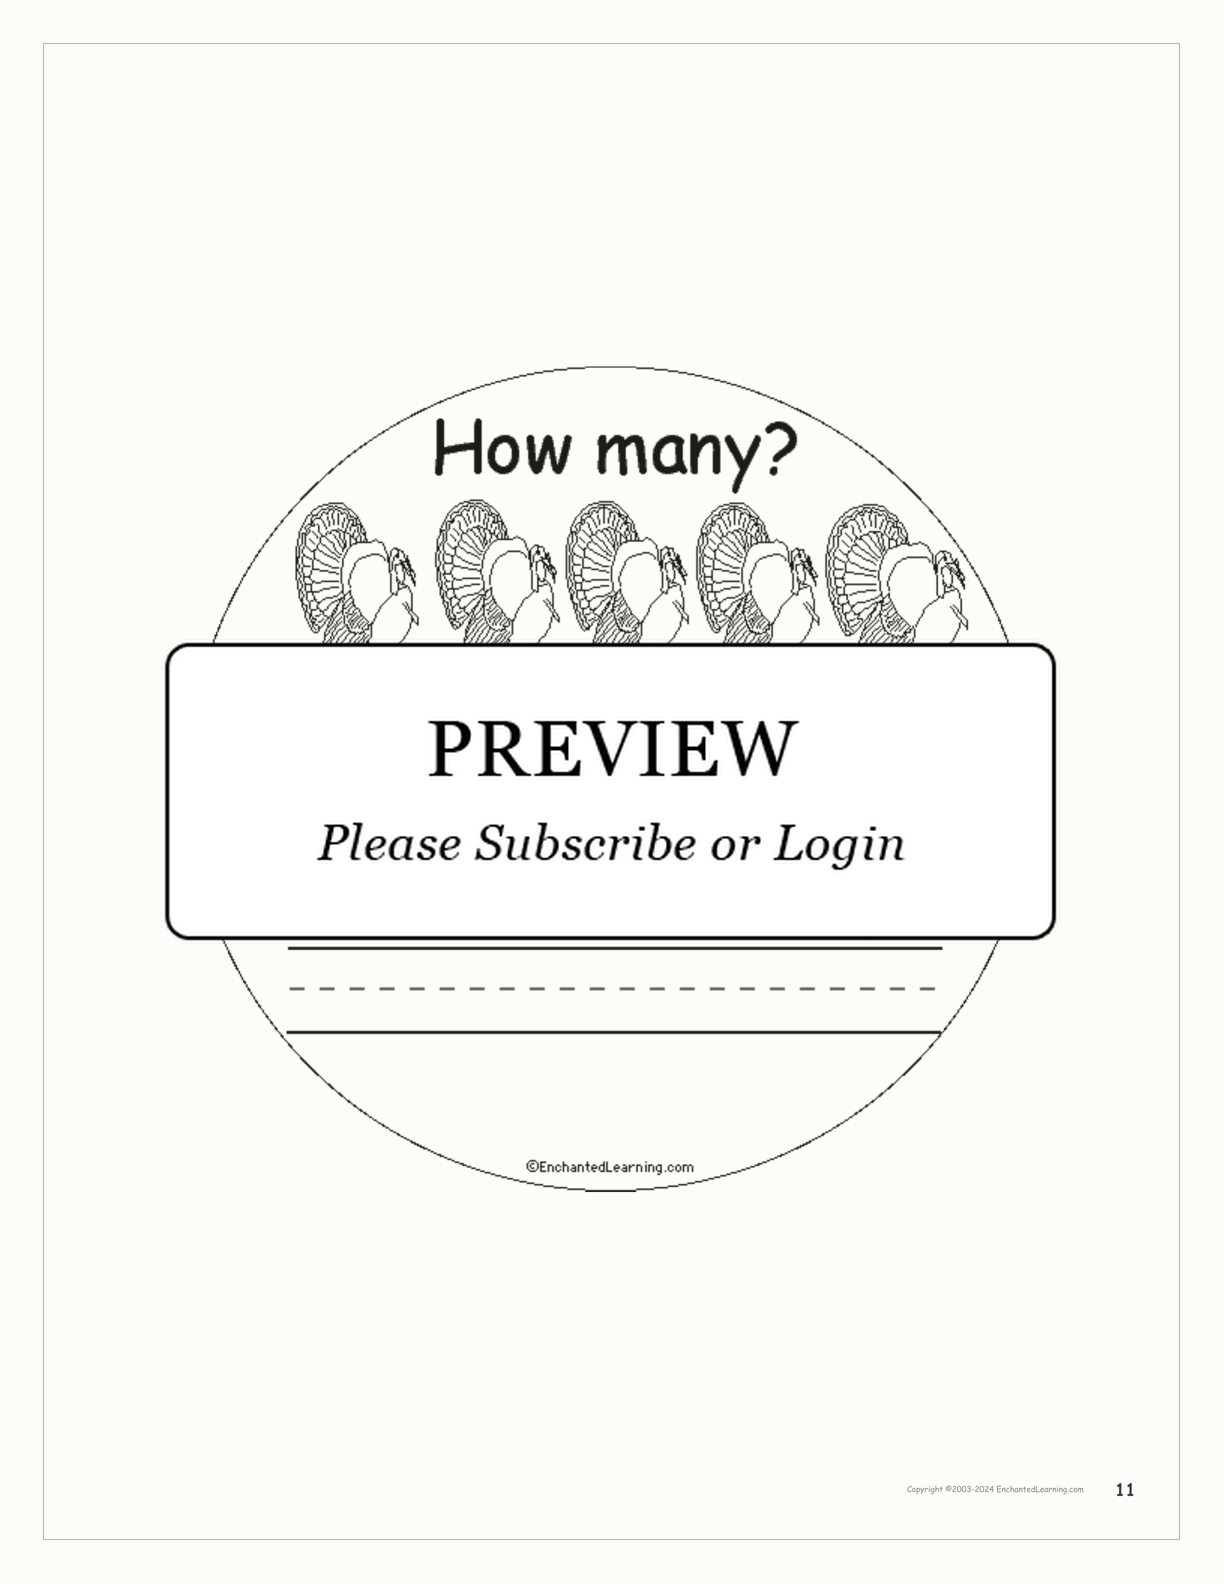 How Many Turkeys? interactive printout page 11